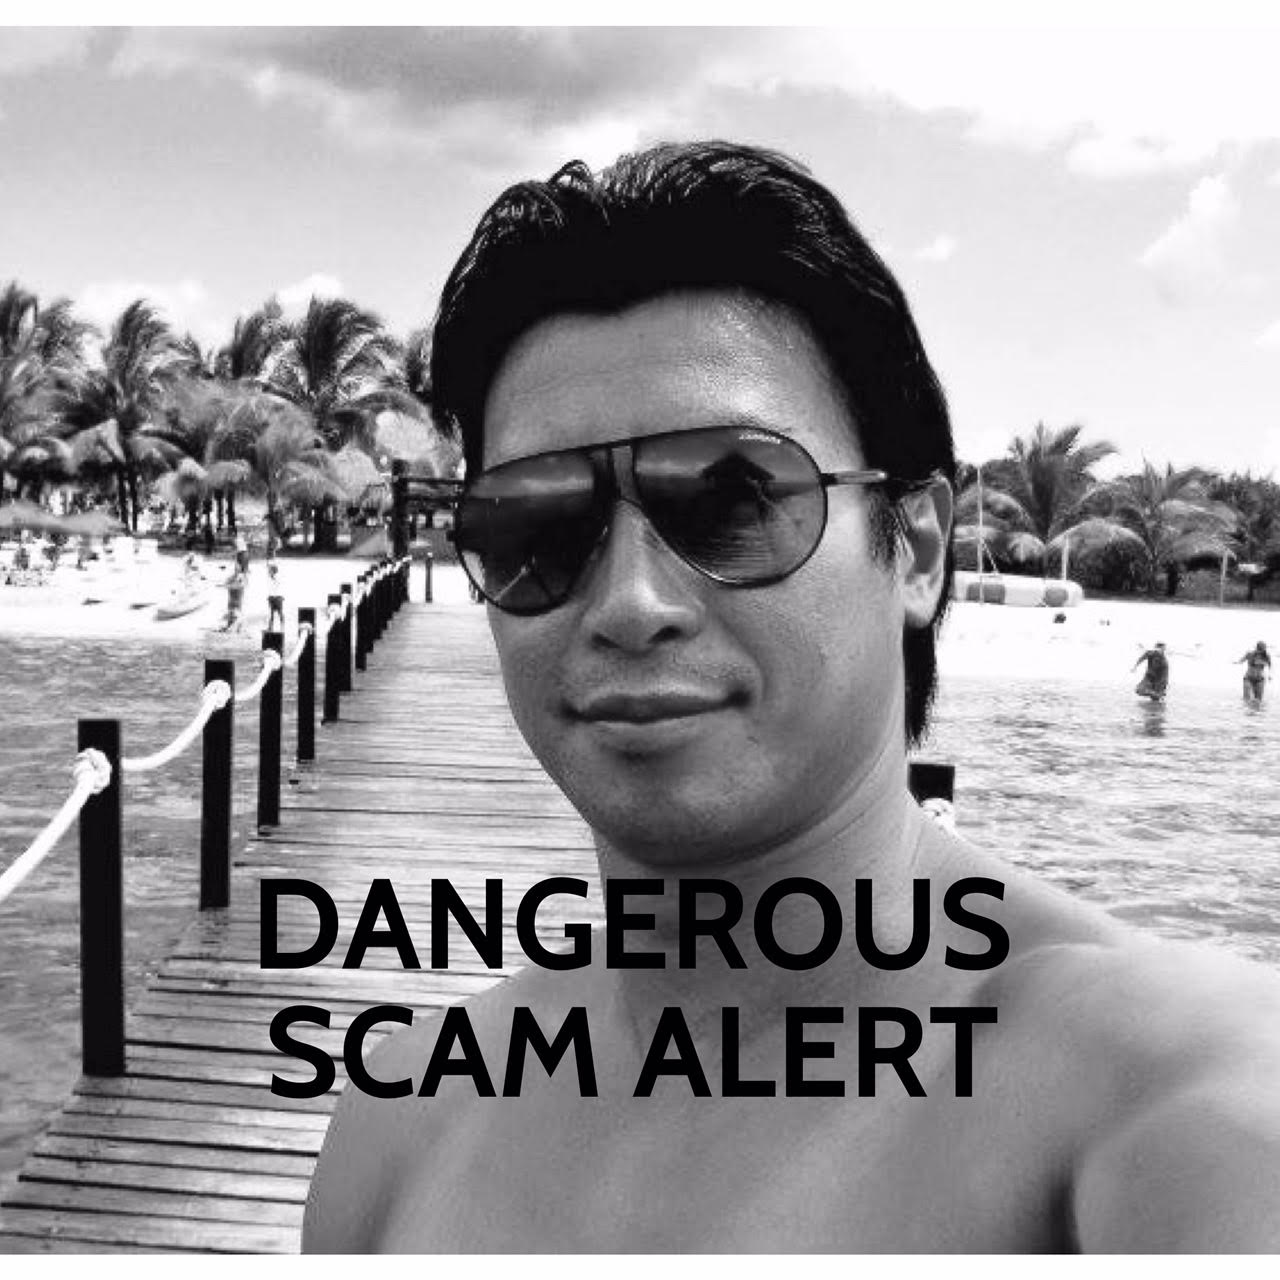 Oil rig scammer photos